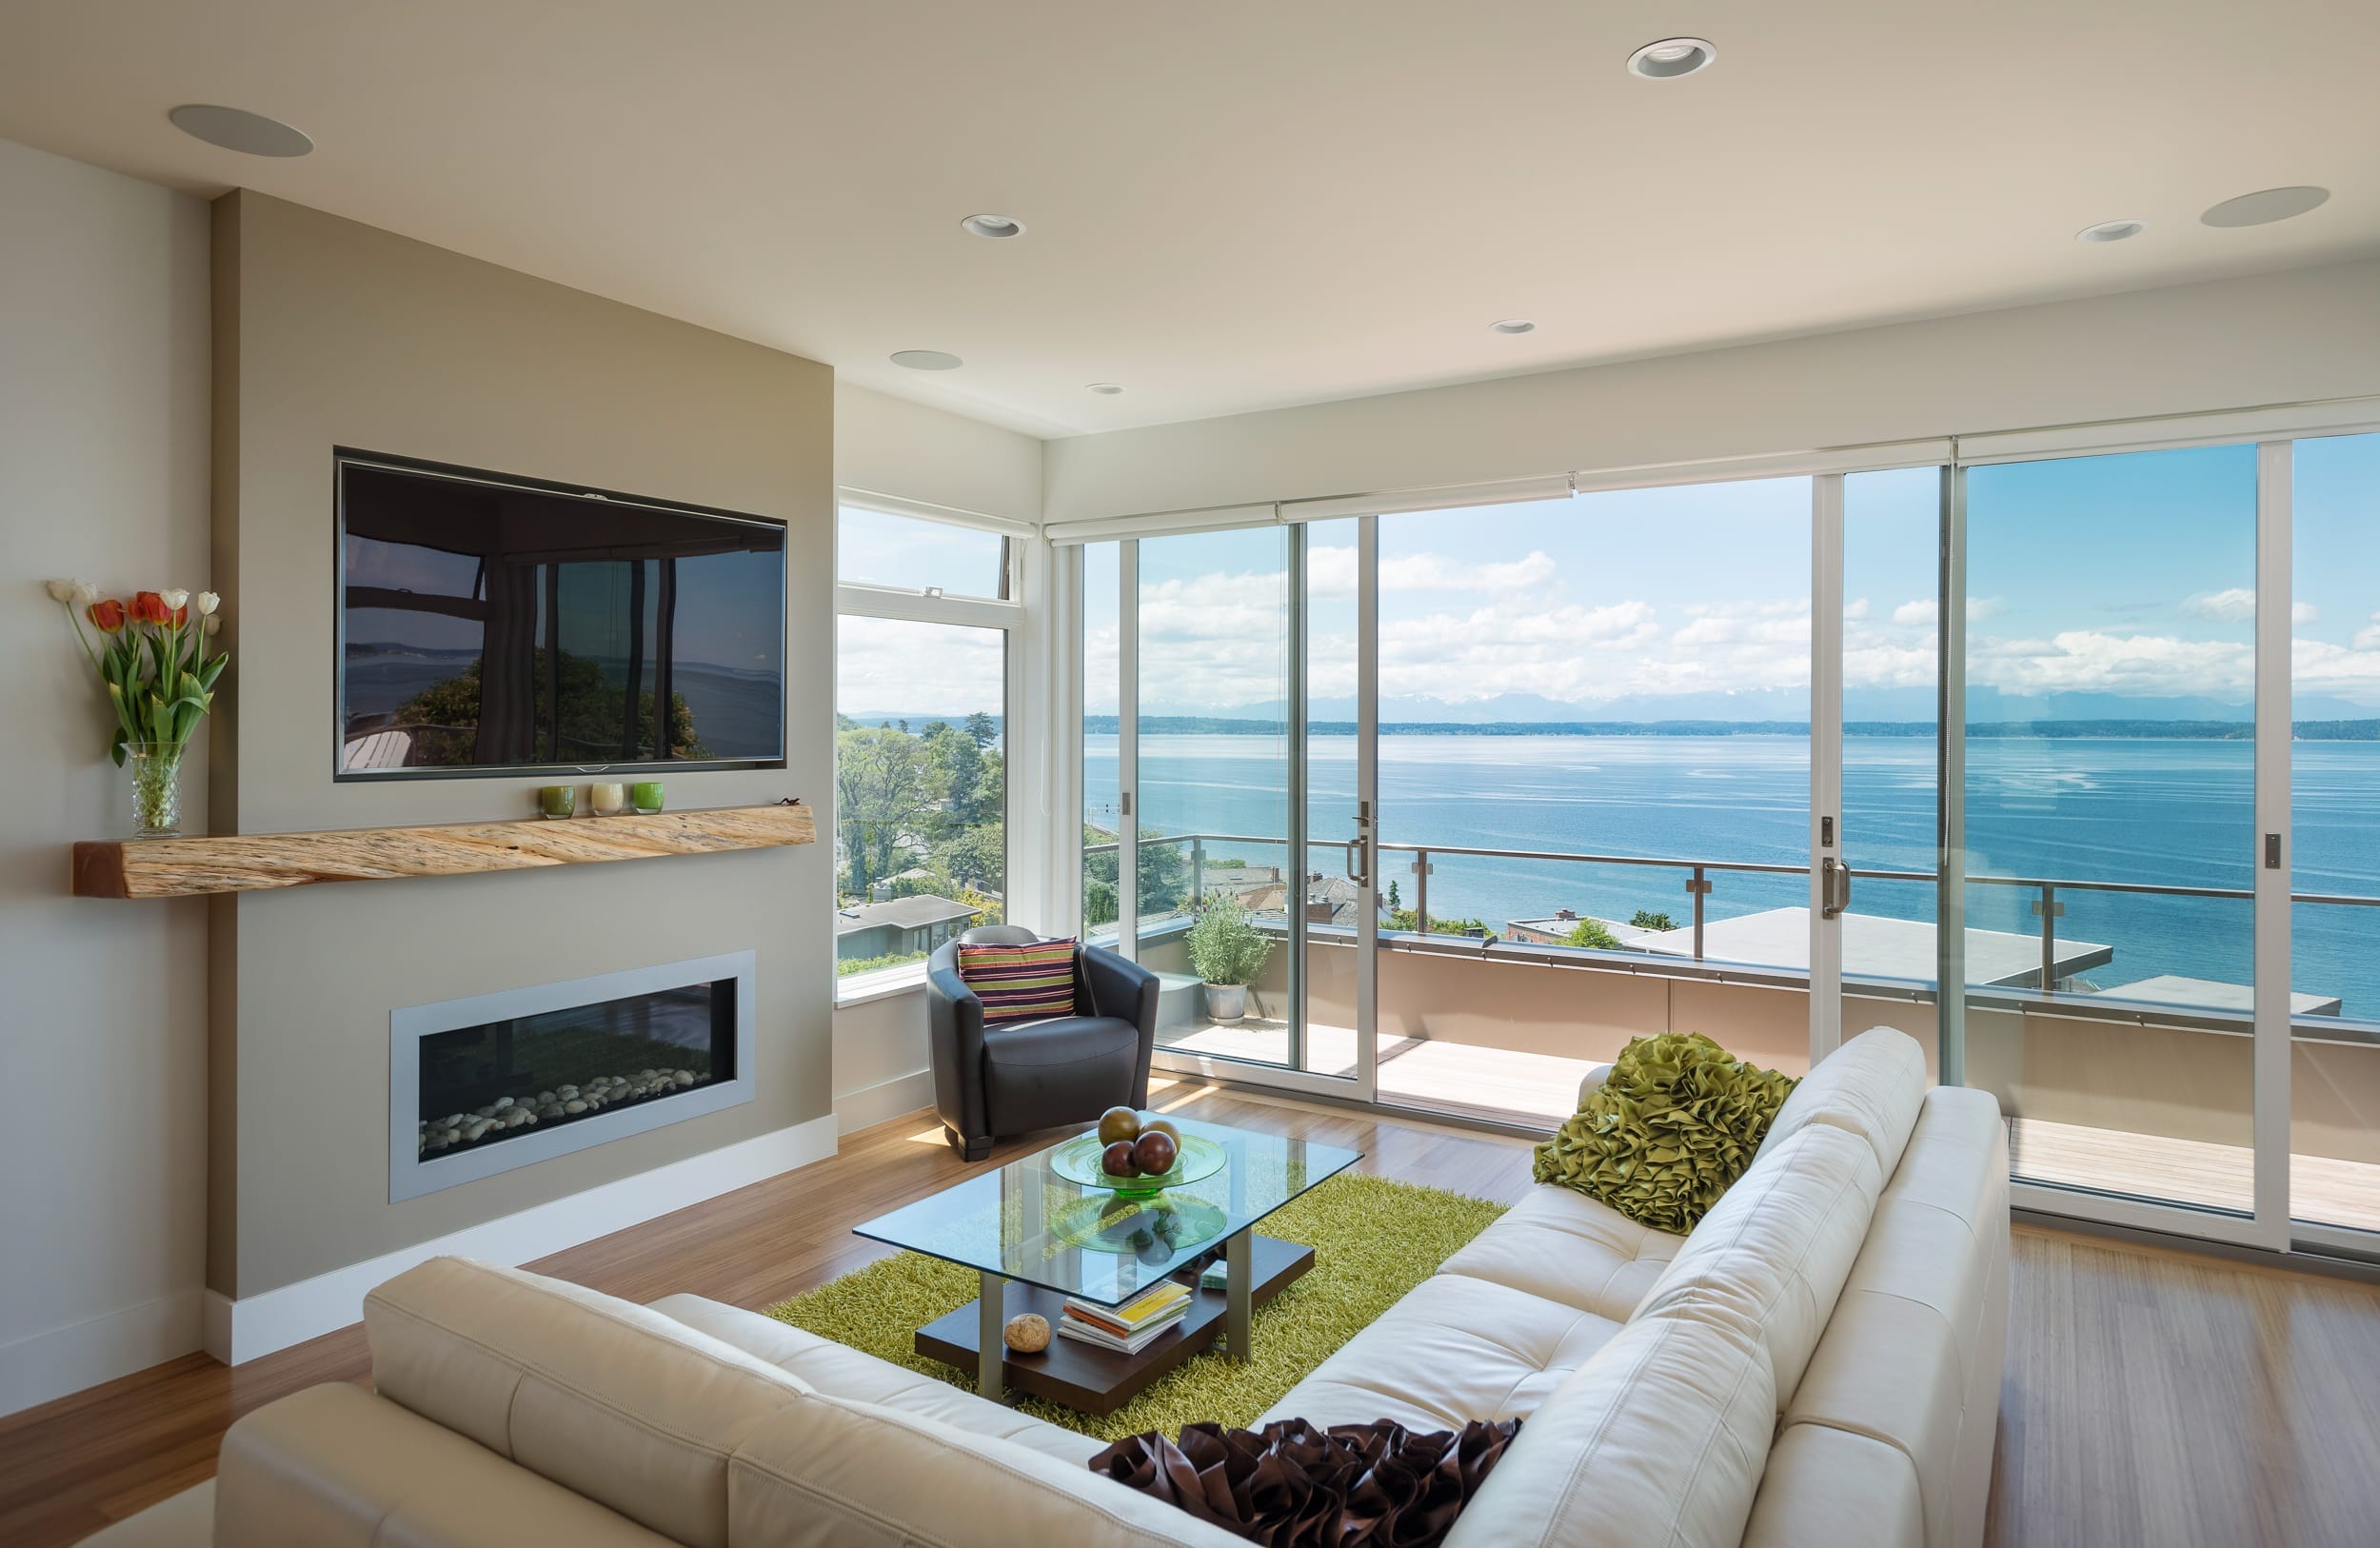 A living room with a large glass door overlooking the water.